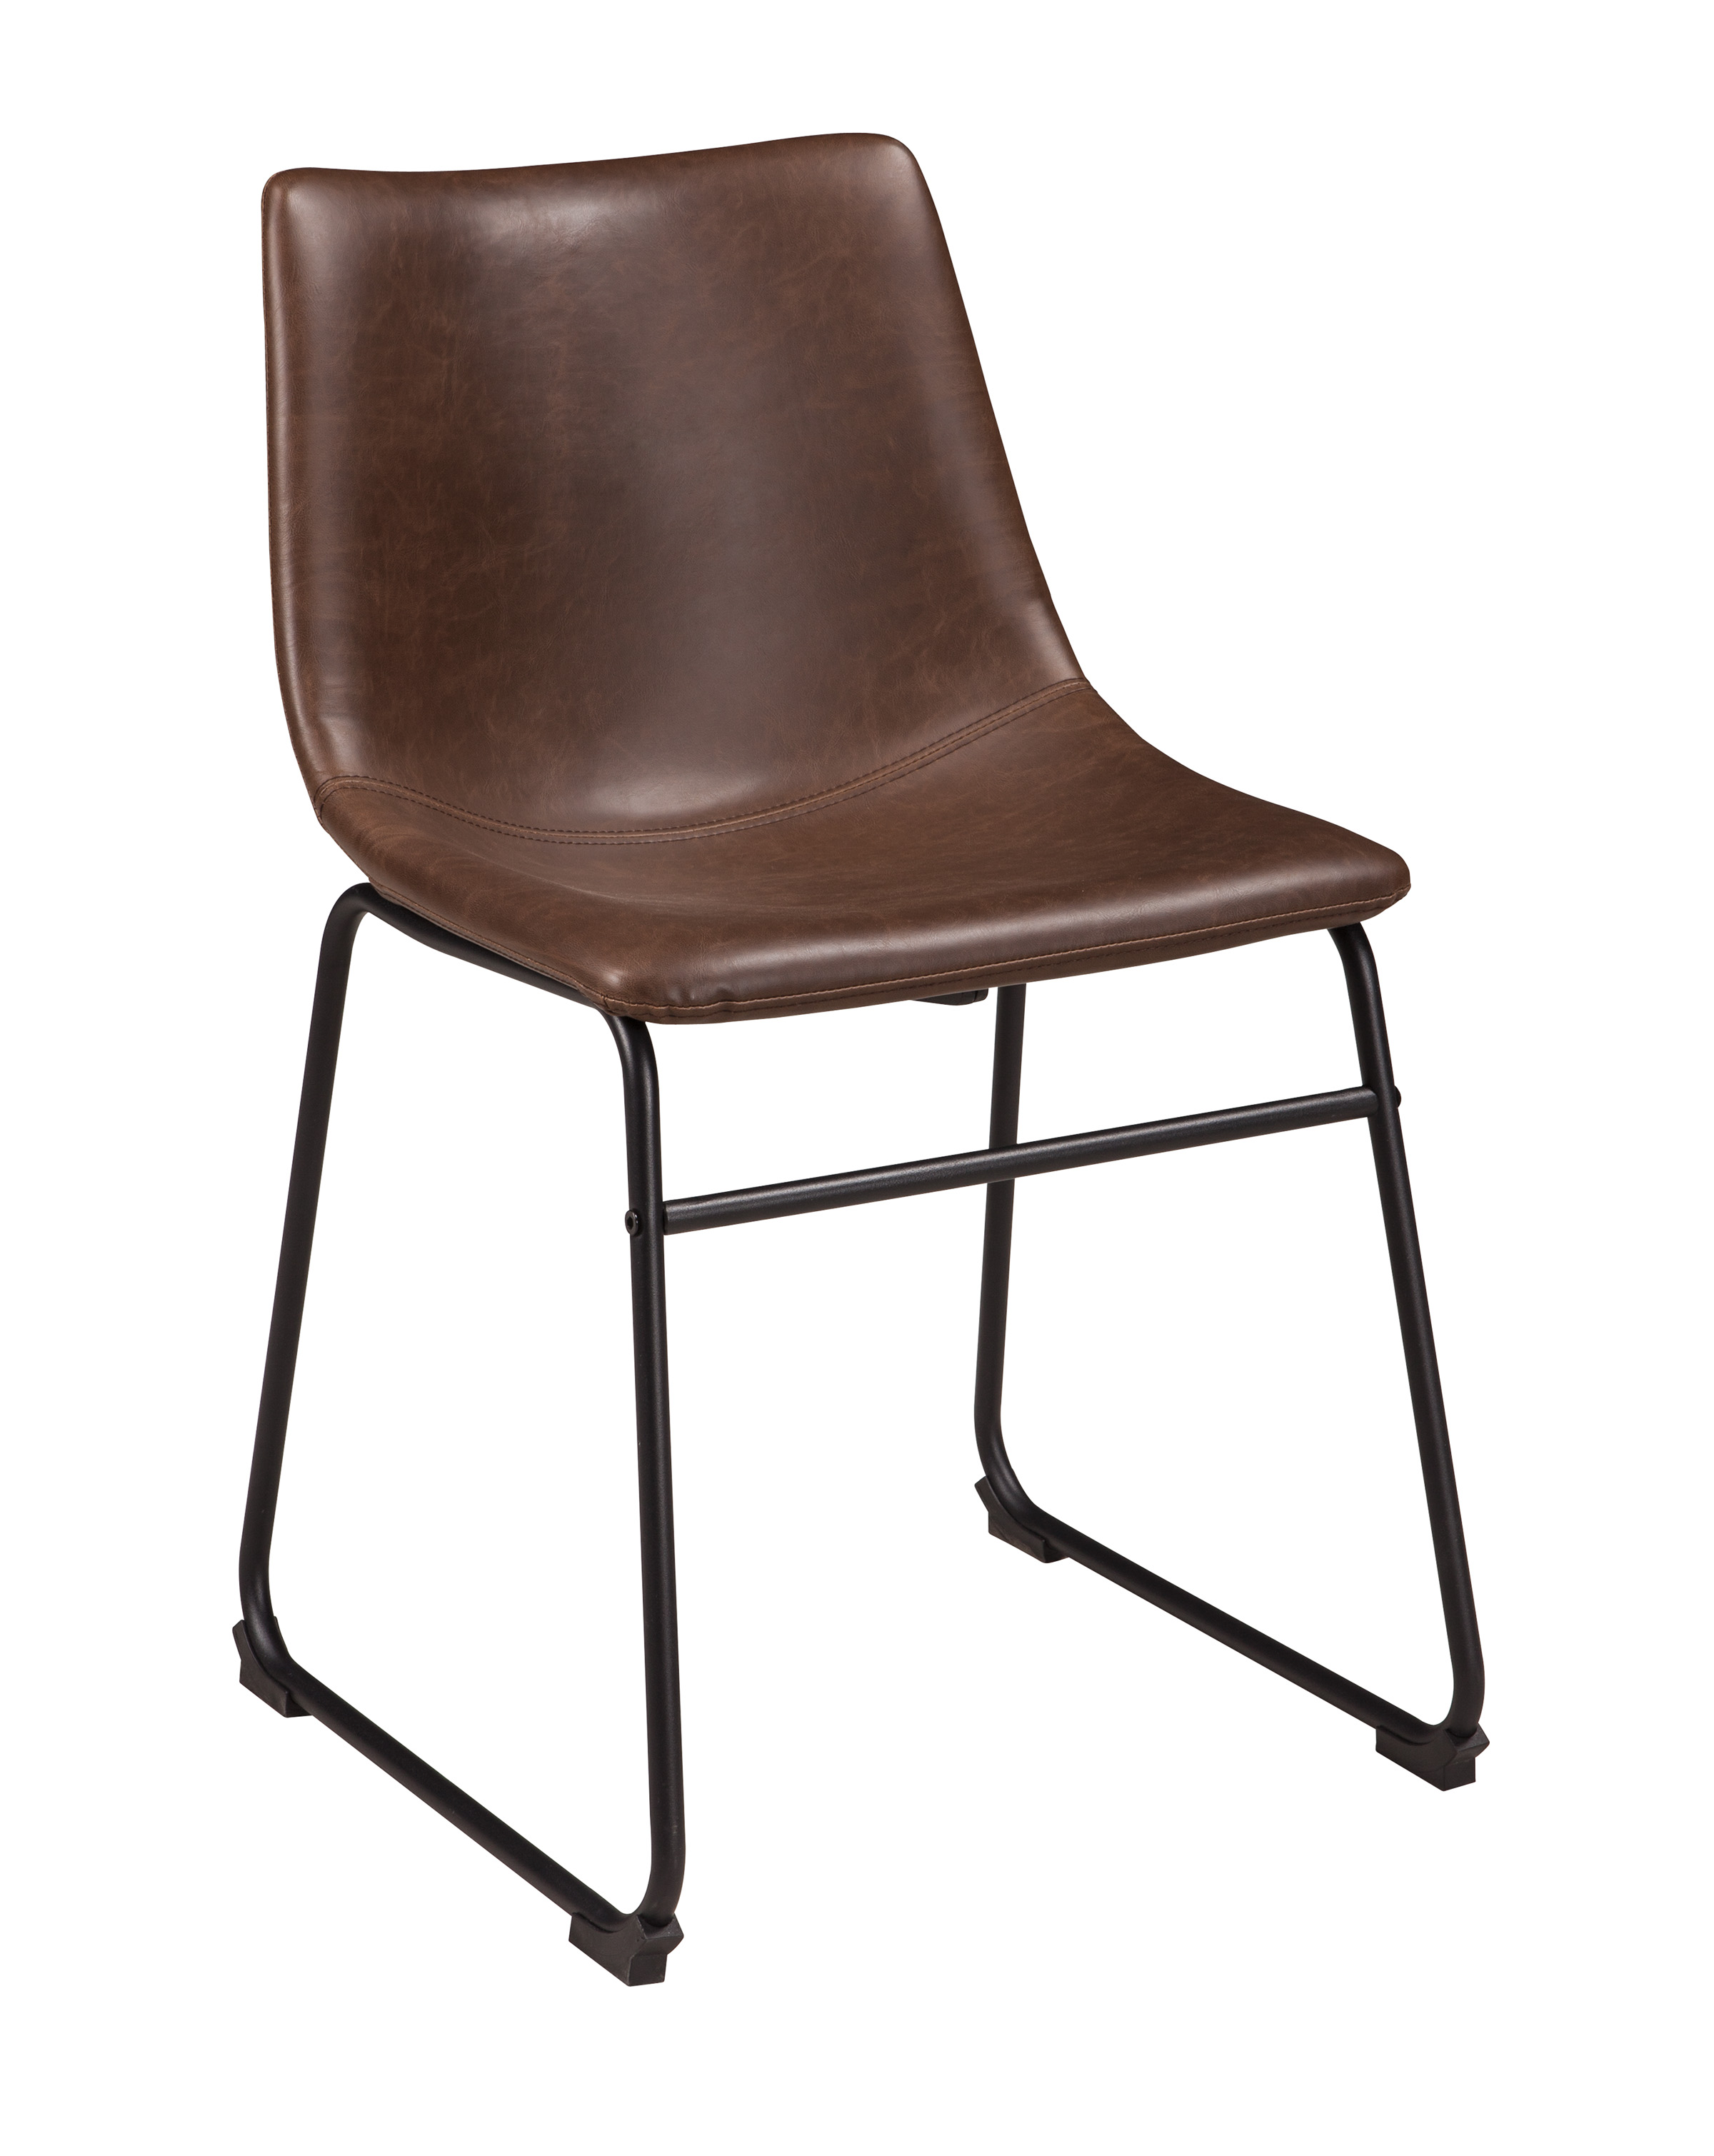 Flinders Mid-century Style Faux Leather Dining Chair